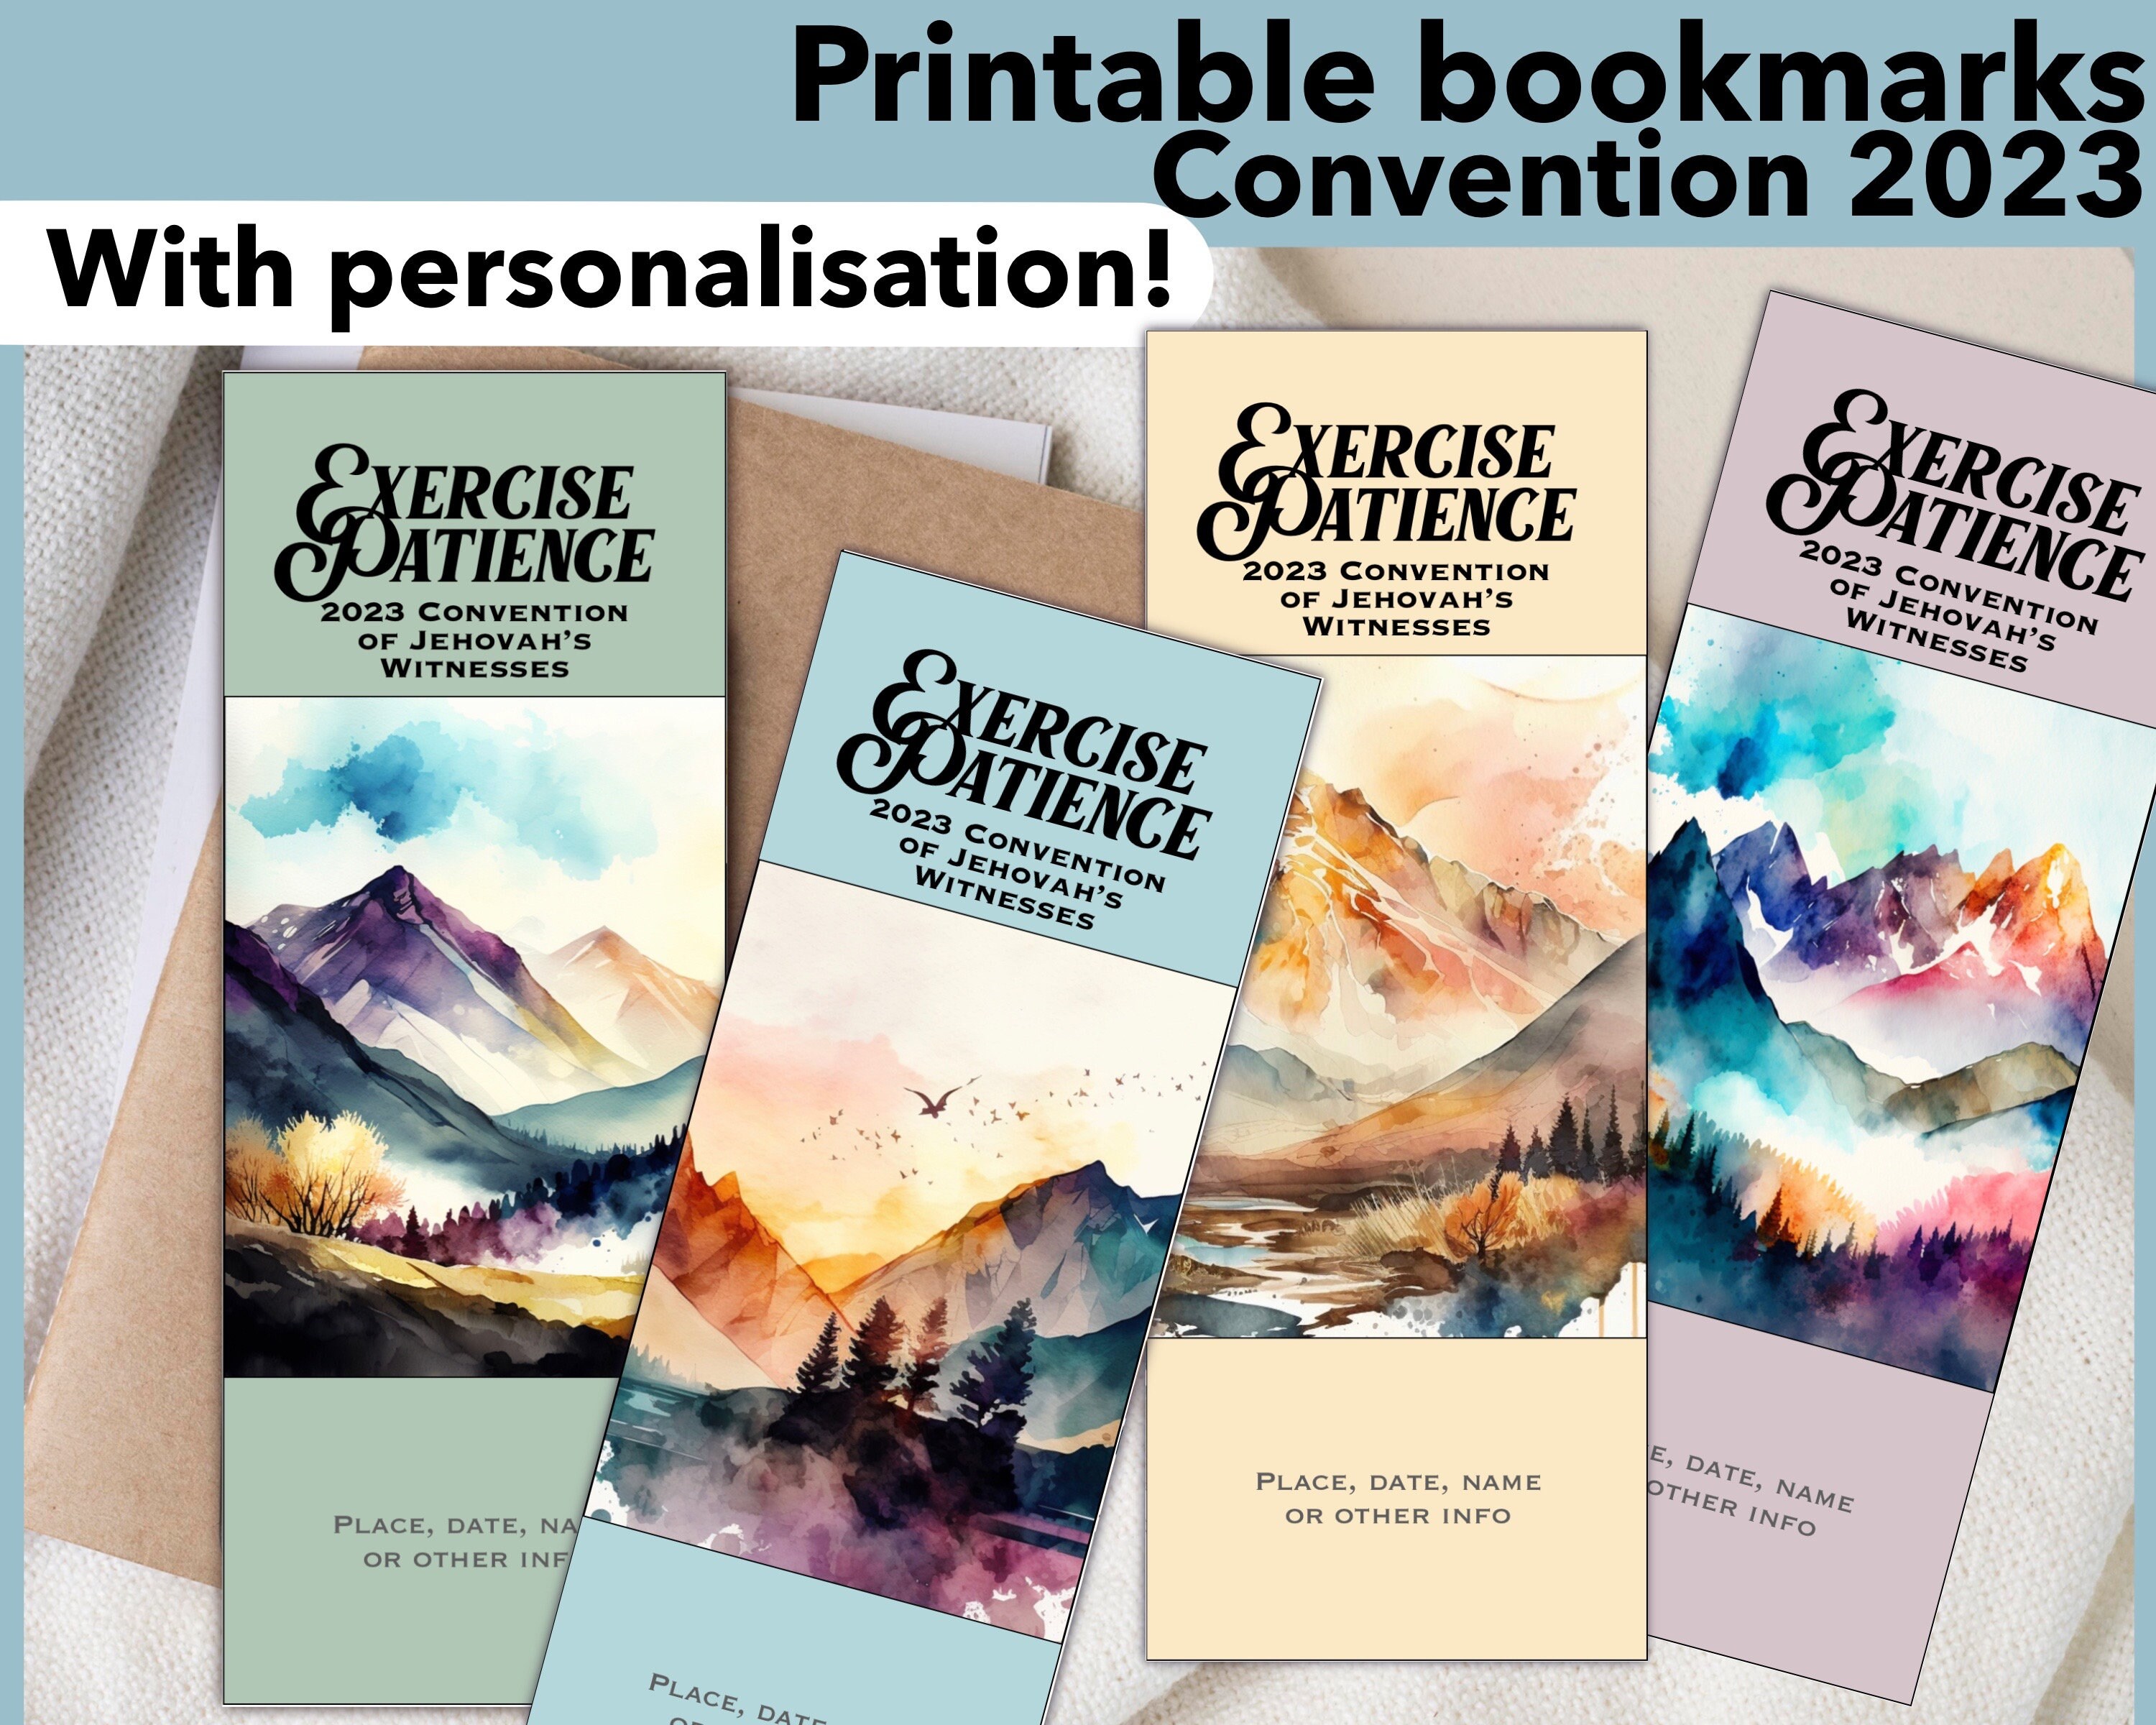 JW bookmarks Exercise Patience convention 2023 gift with 